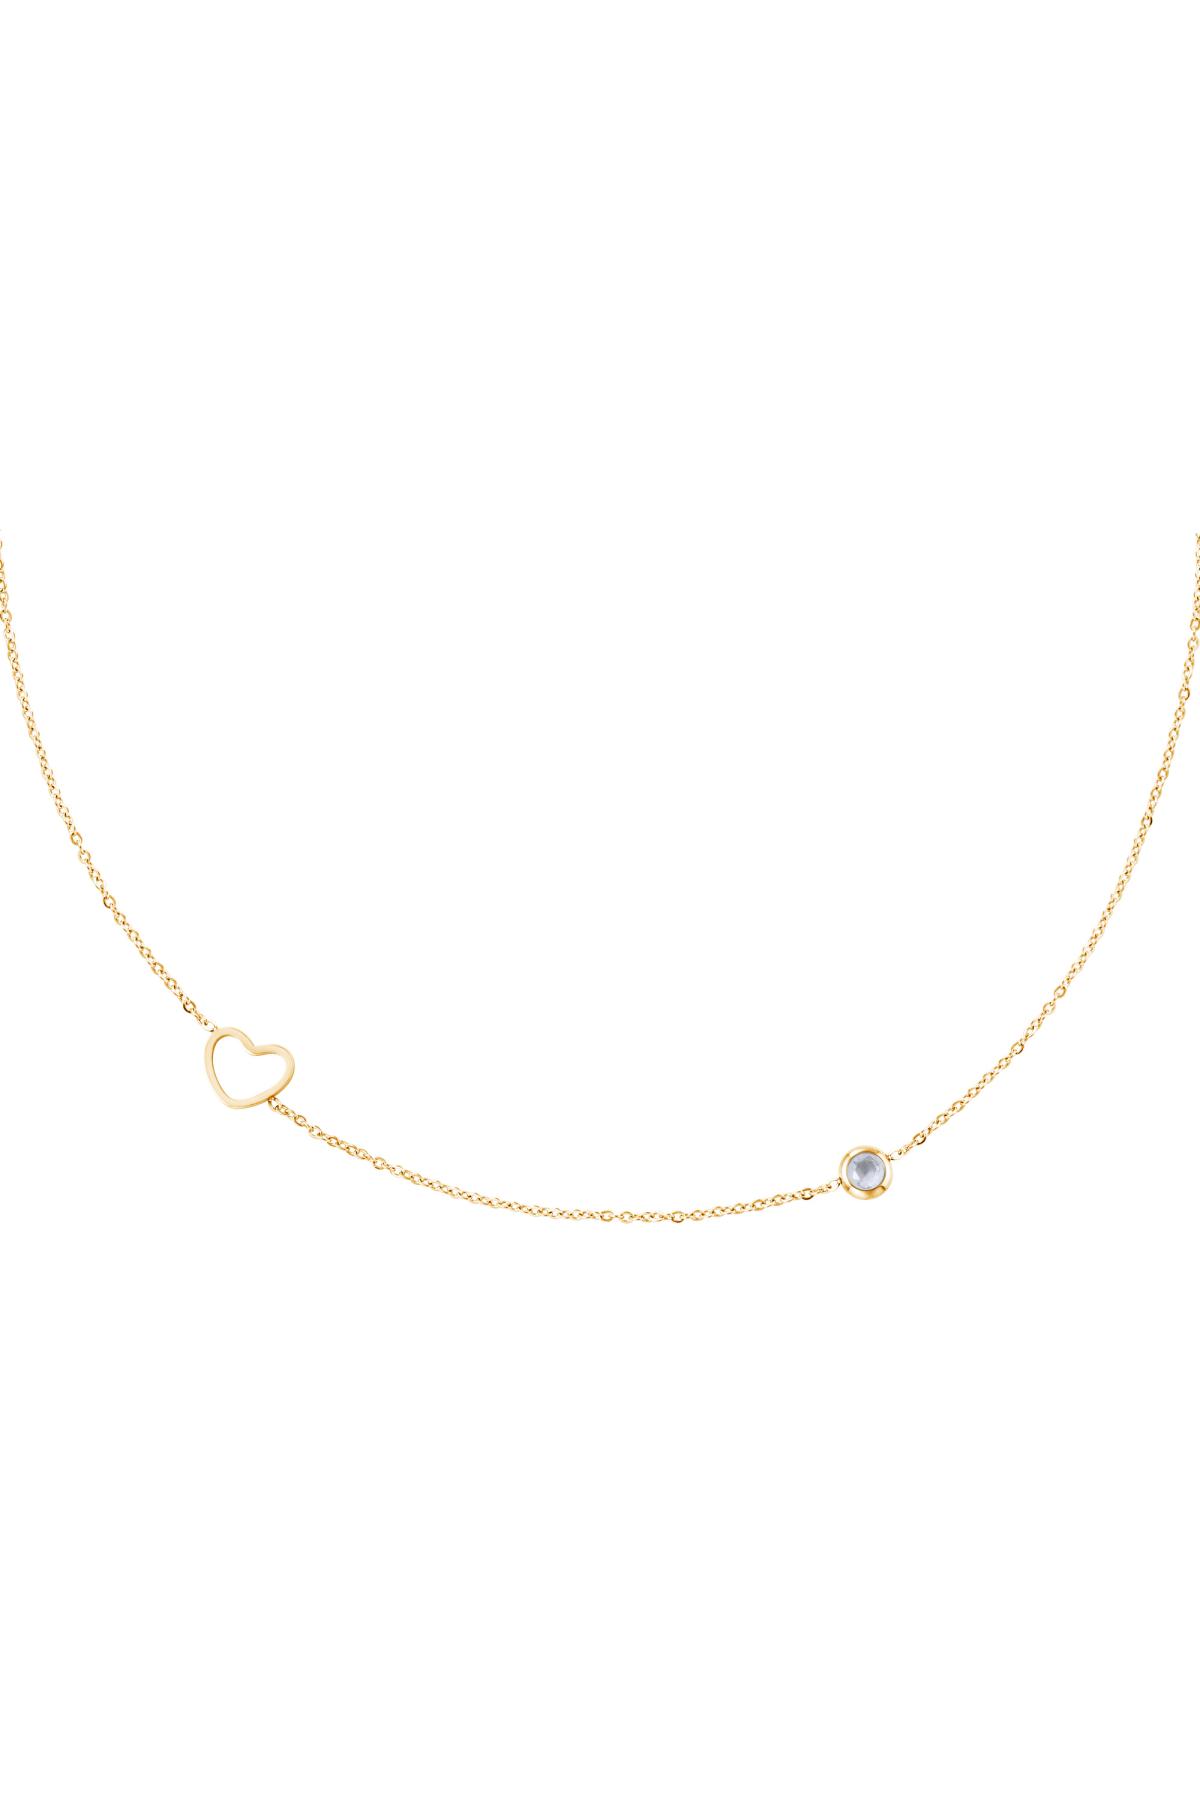 Birthstone necklace June gold Transparent Stainless Steel h5 